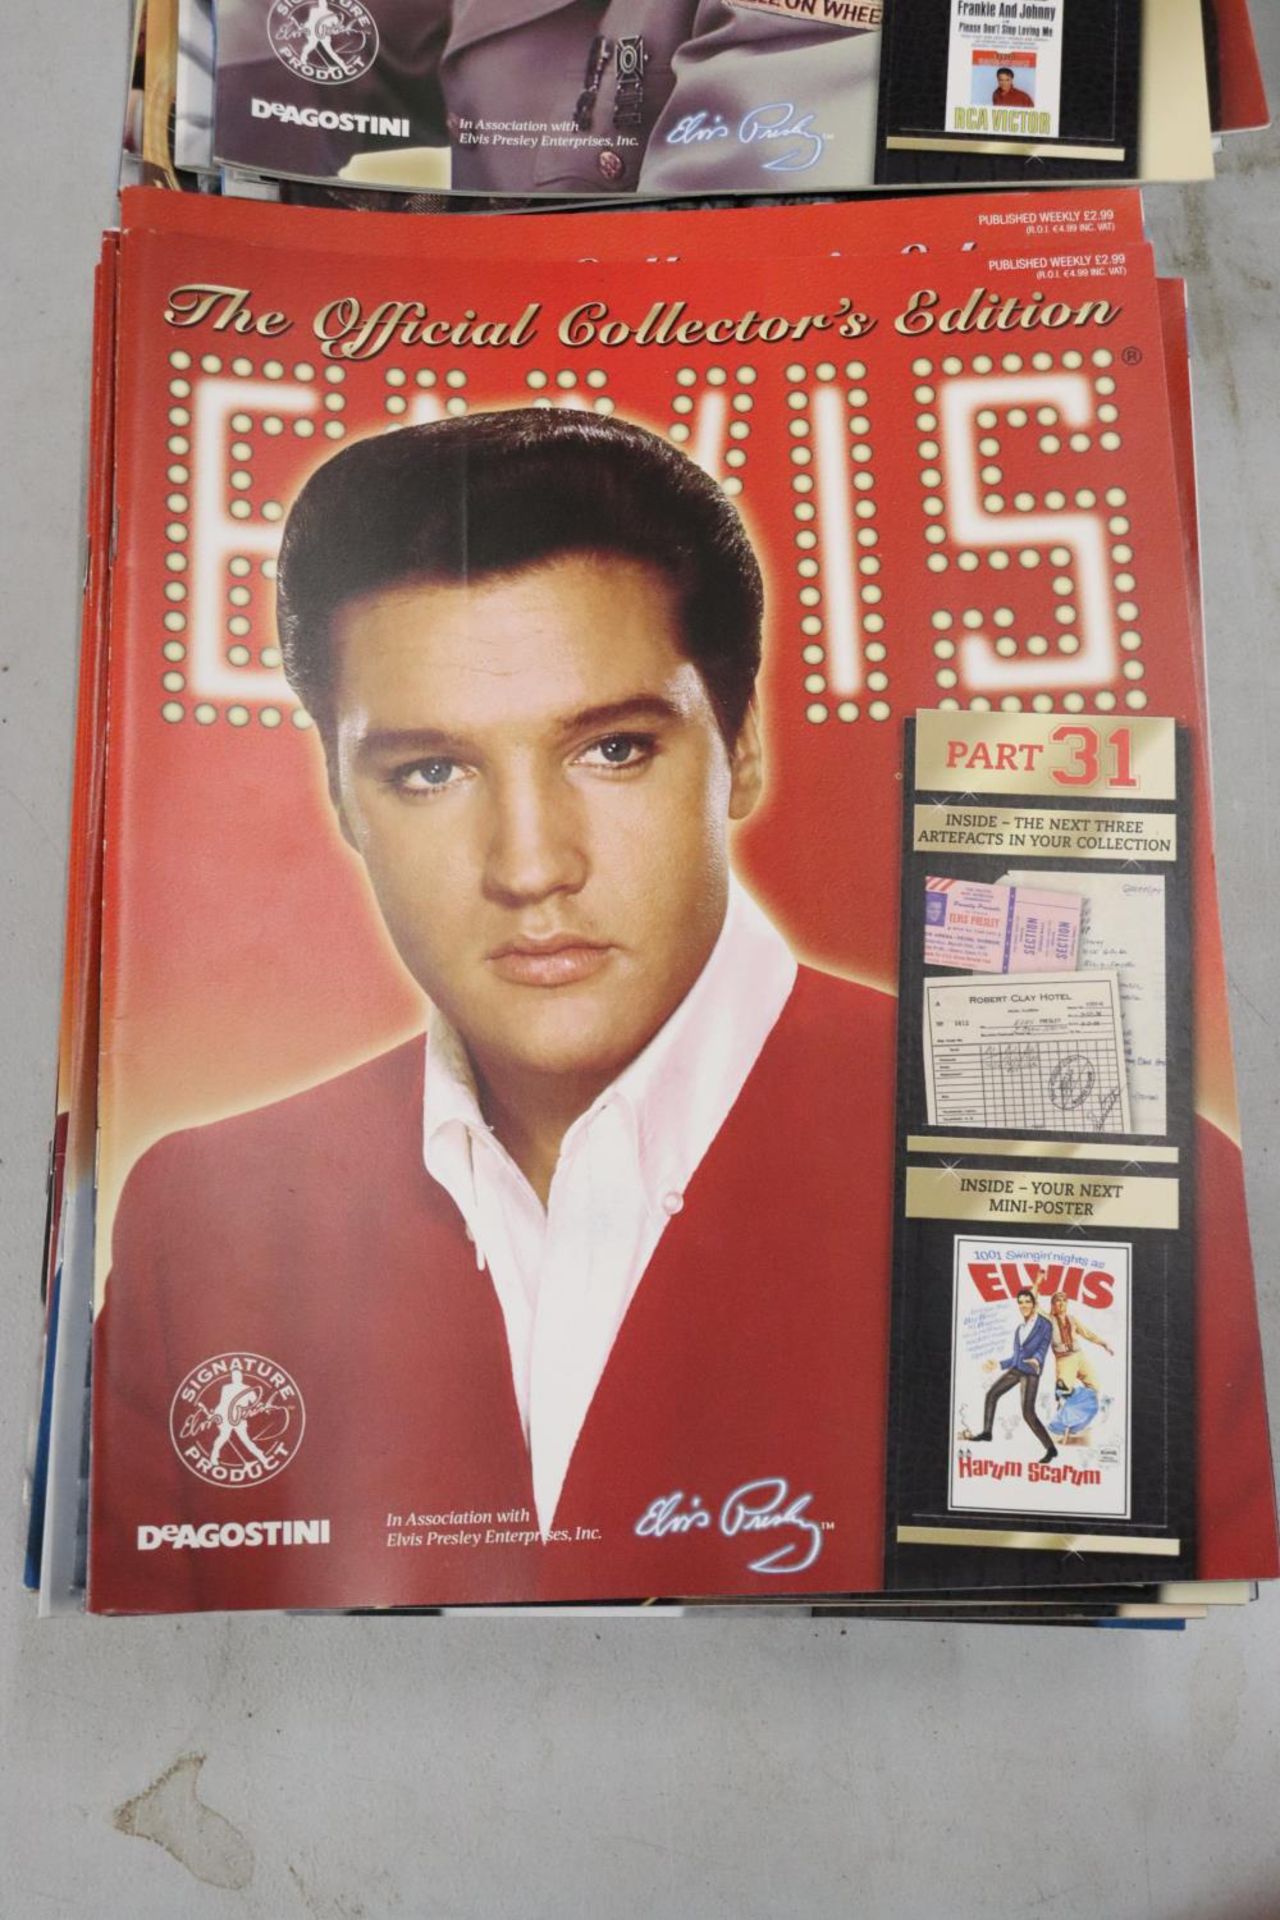 A LARGE QUANTITY OF OFFICIAL COLLECTOR'S EDITIONS, 'ELVIS' BY DEAGOSTINI, IN GOOD CONDITION - Image 3 of 5